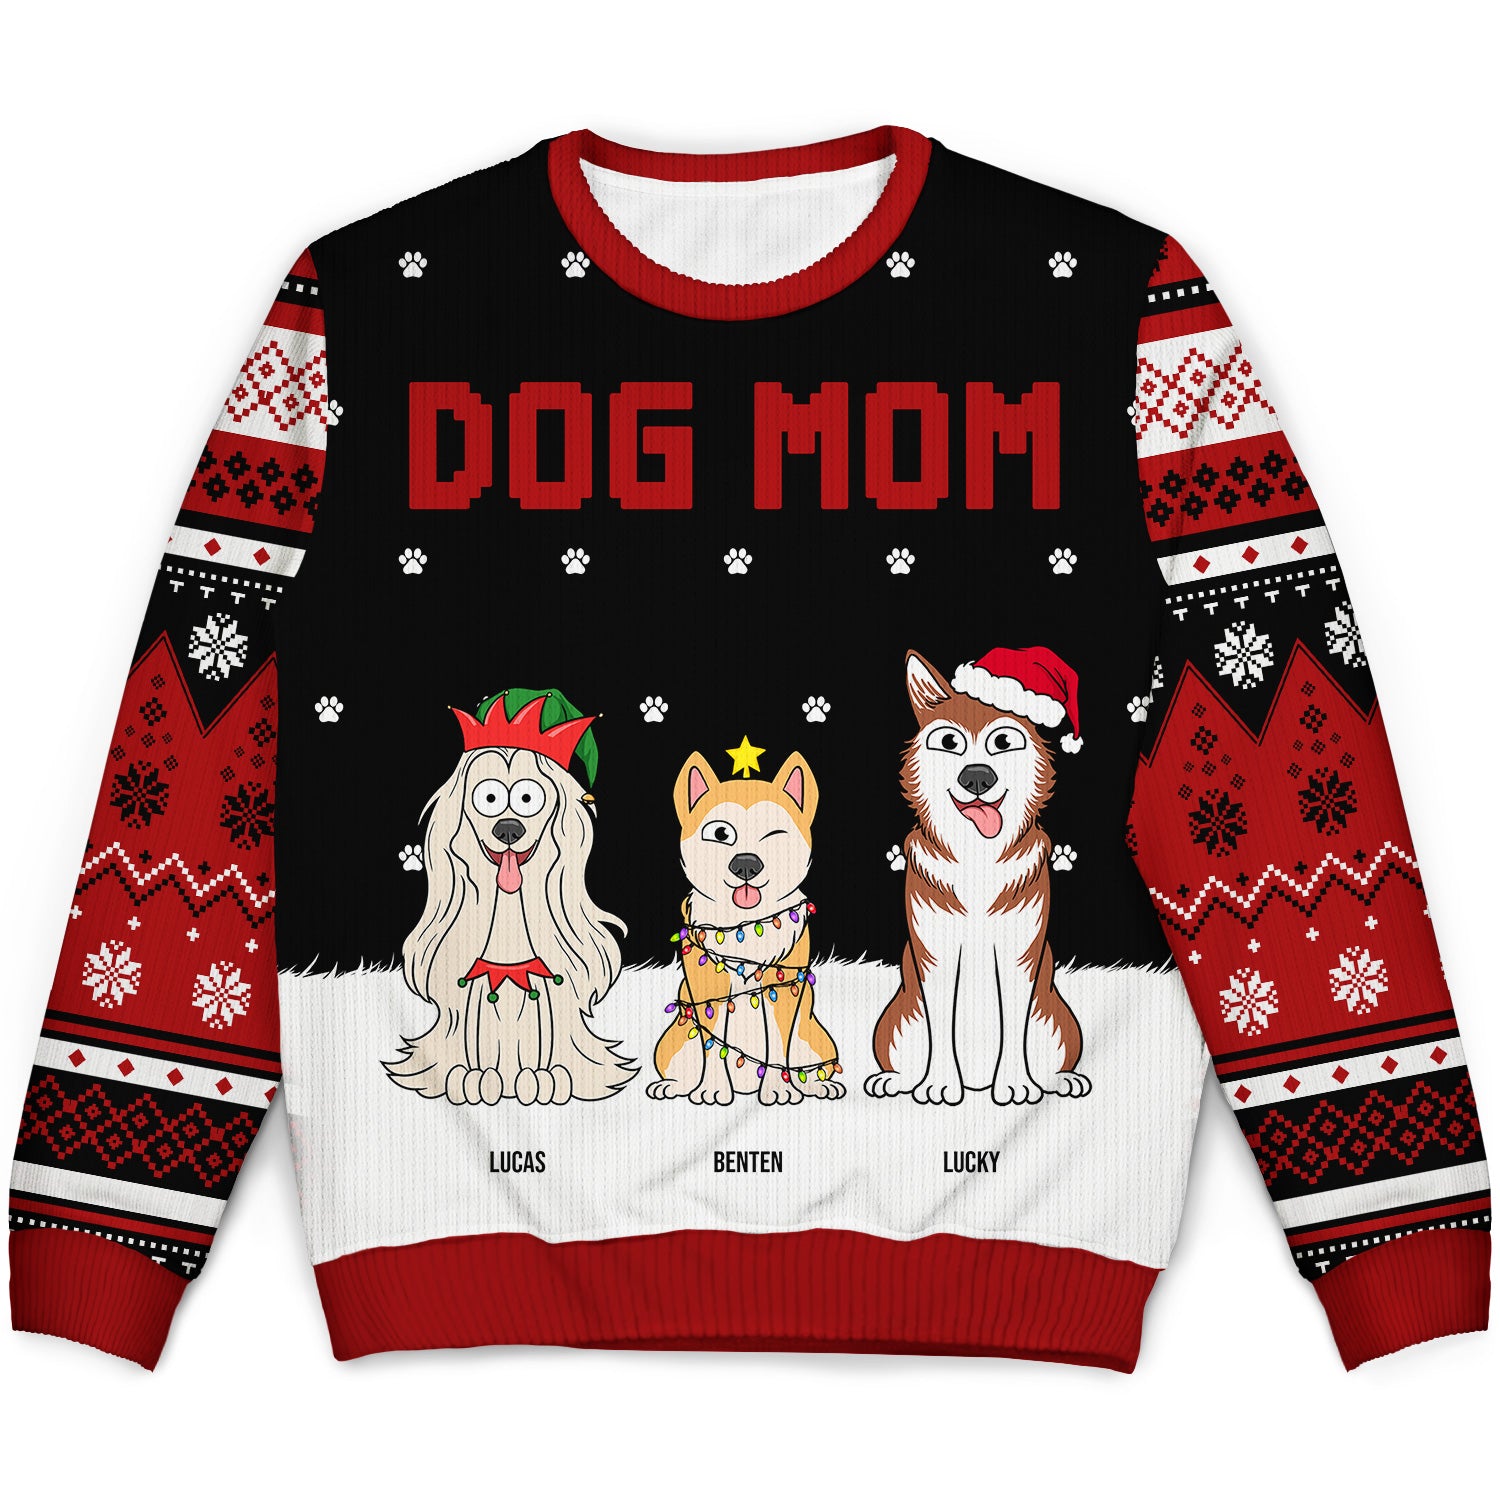 Best Dog Mom Ever - Gift For Dog Lovers - Personalized Unisex Ugly Sweater